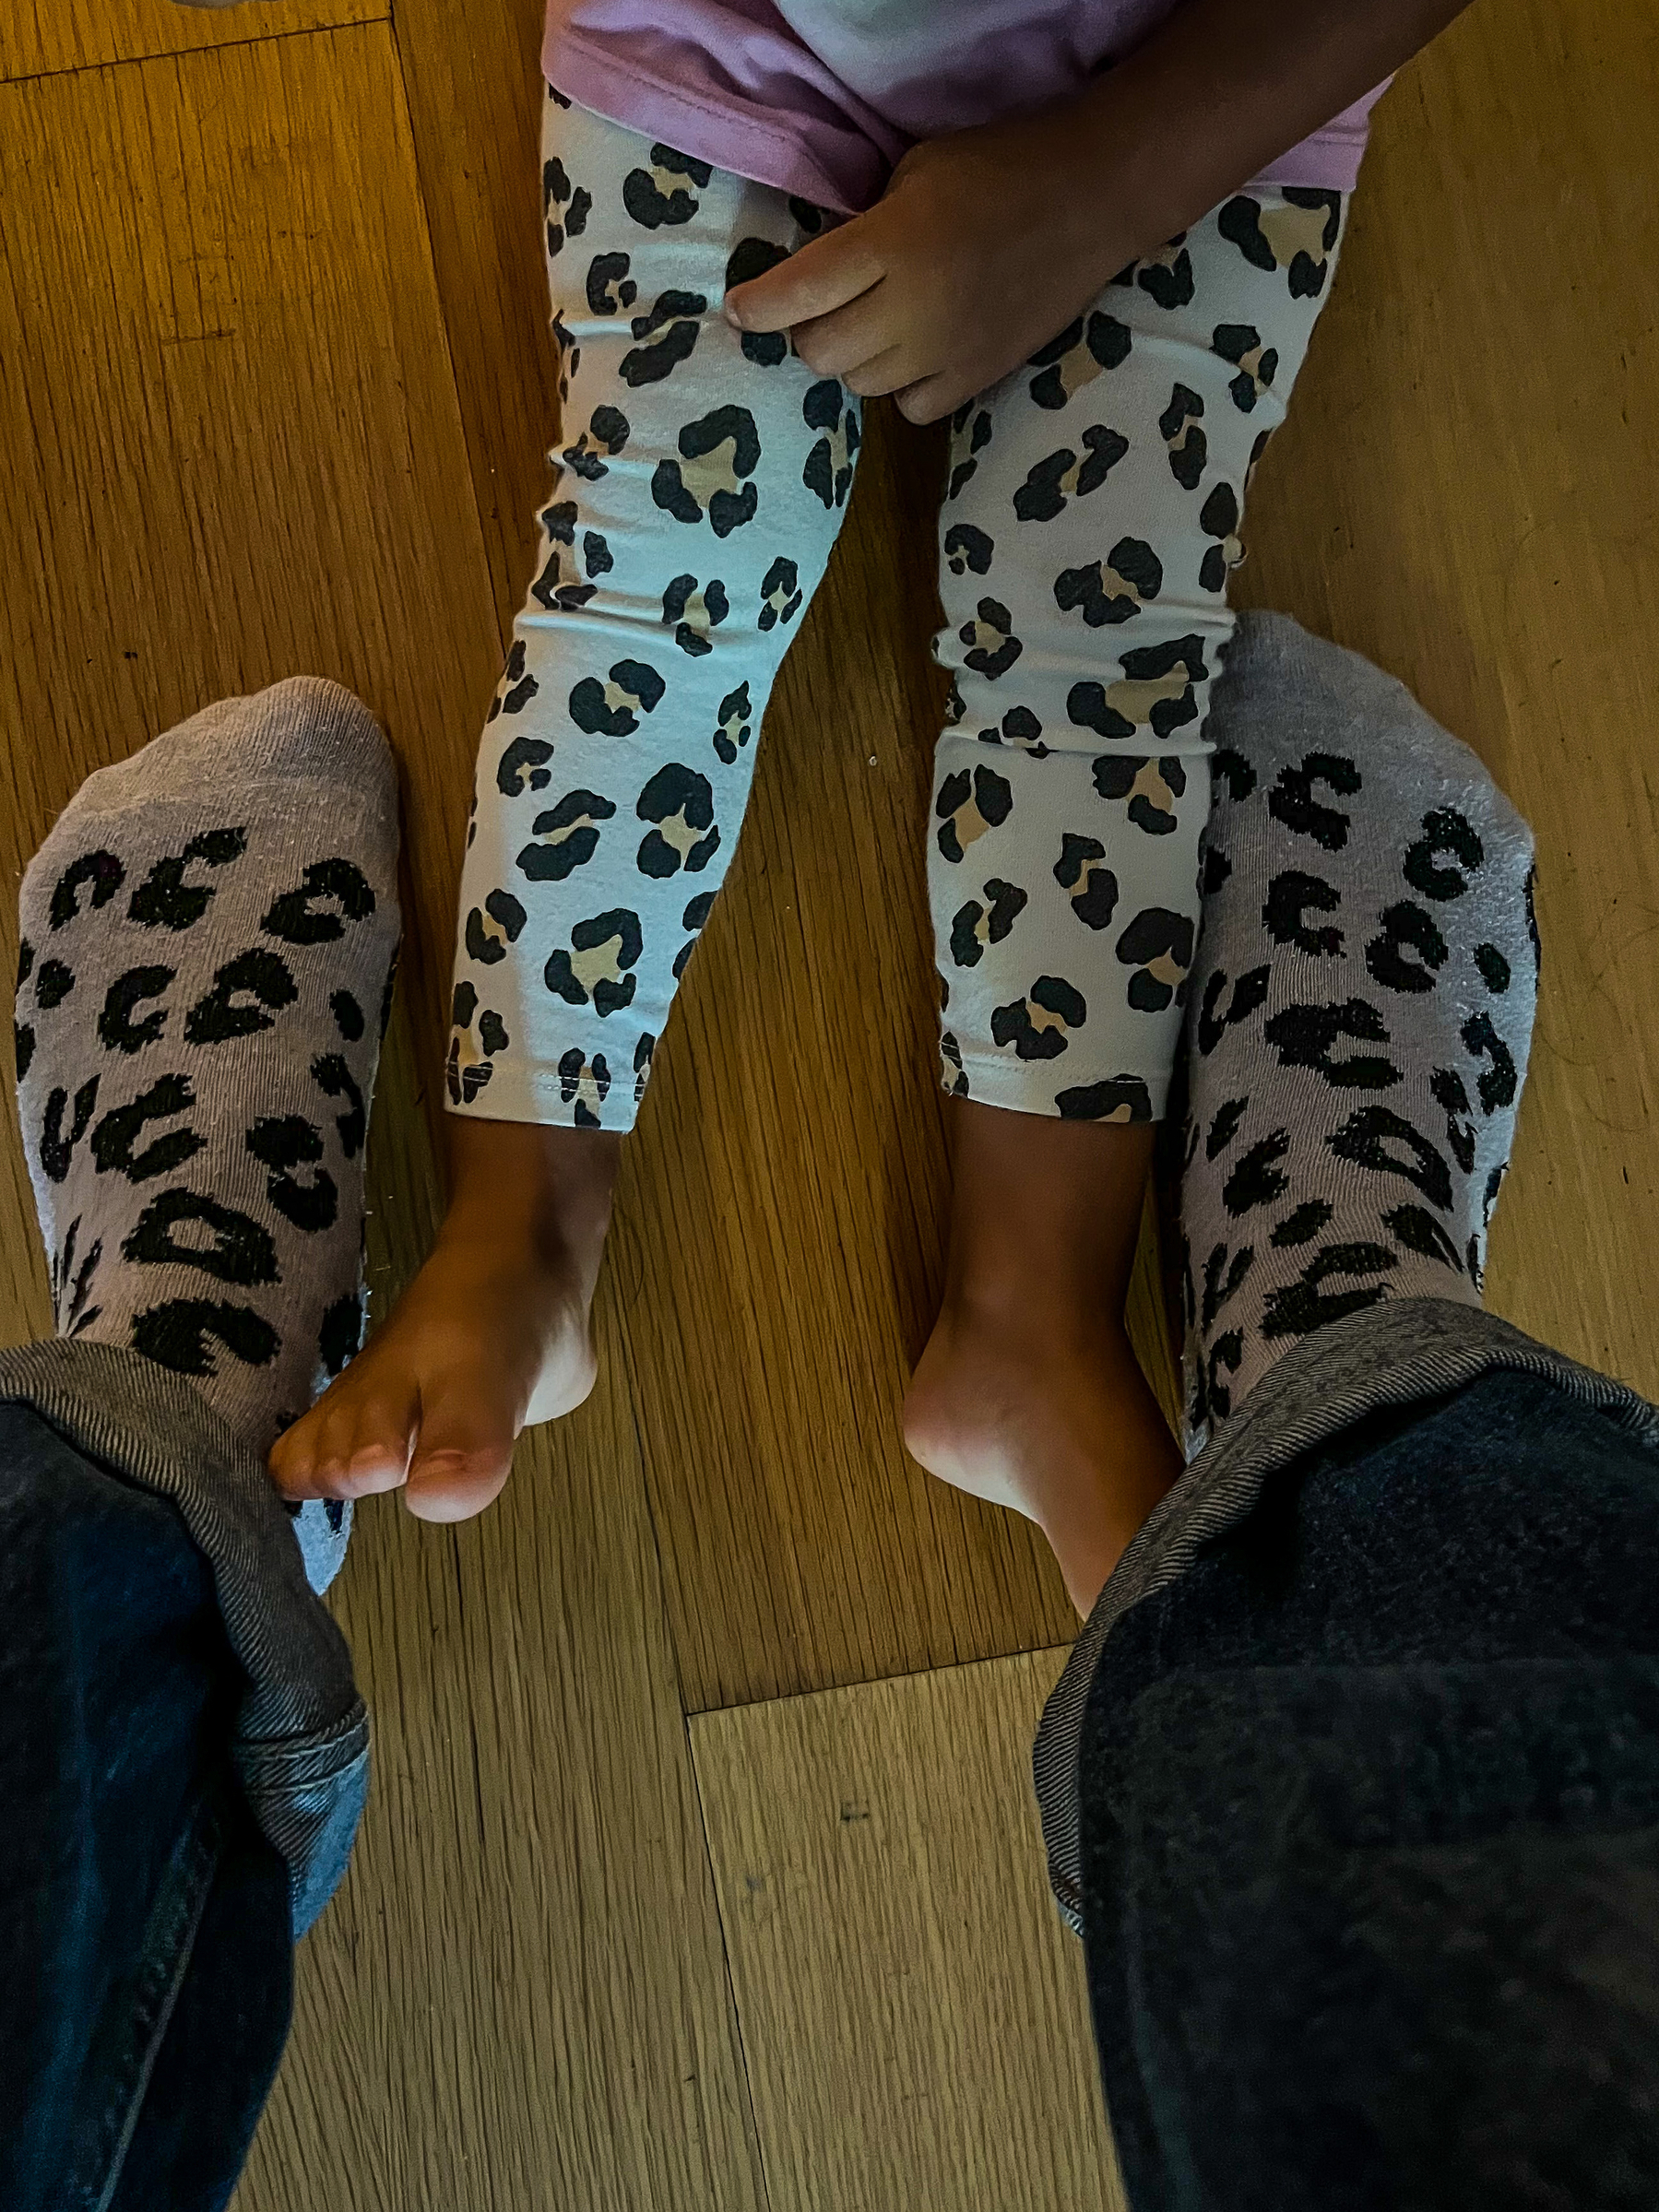 looking down we see a toddler’s legs and a grownup’s legs. Both are wearing leopard print items